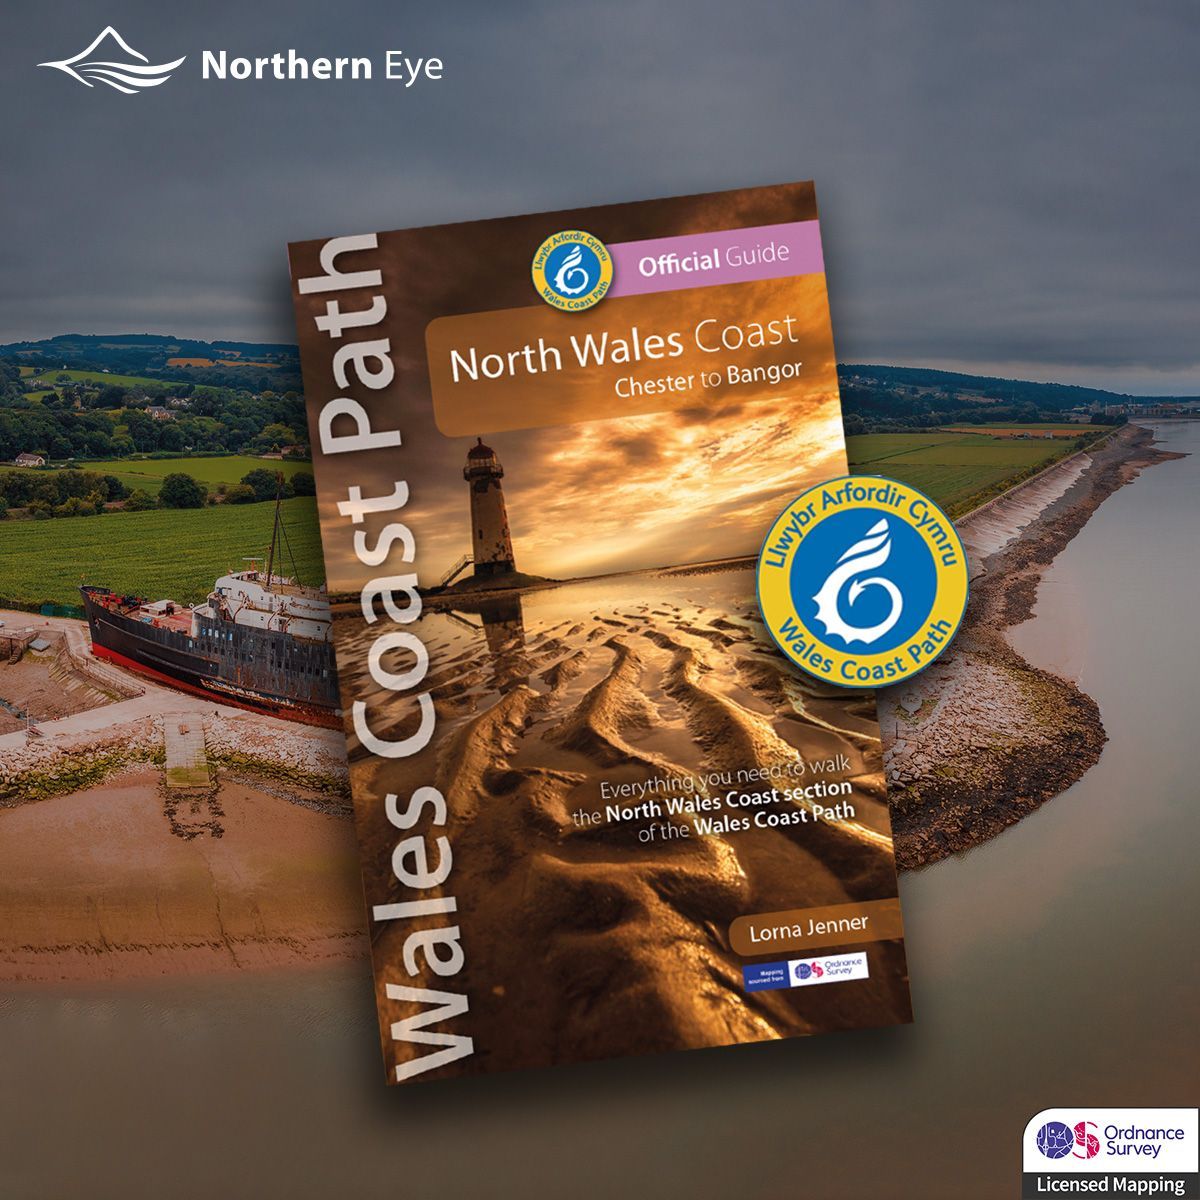 Everything you need to walk the 80mile/125km long North Wales Coast section of the Wales Coast Path. Get your Official Guide at buff.ly/3n1bbsx Also available on Amazon and local outdoor book stockists. #WalesCoastPath #LlwybrArfordirCymru #CroesoCymru #VisitWales